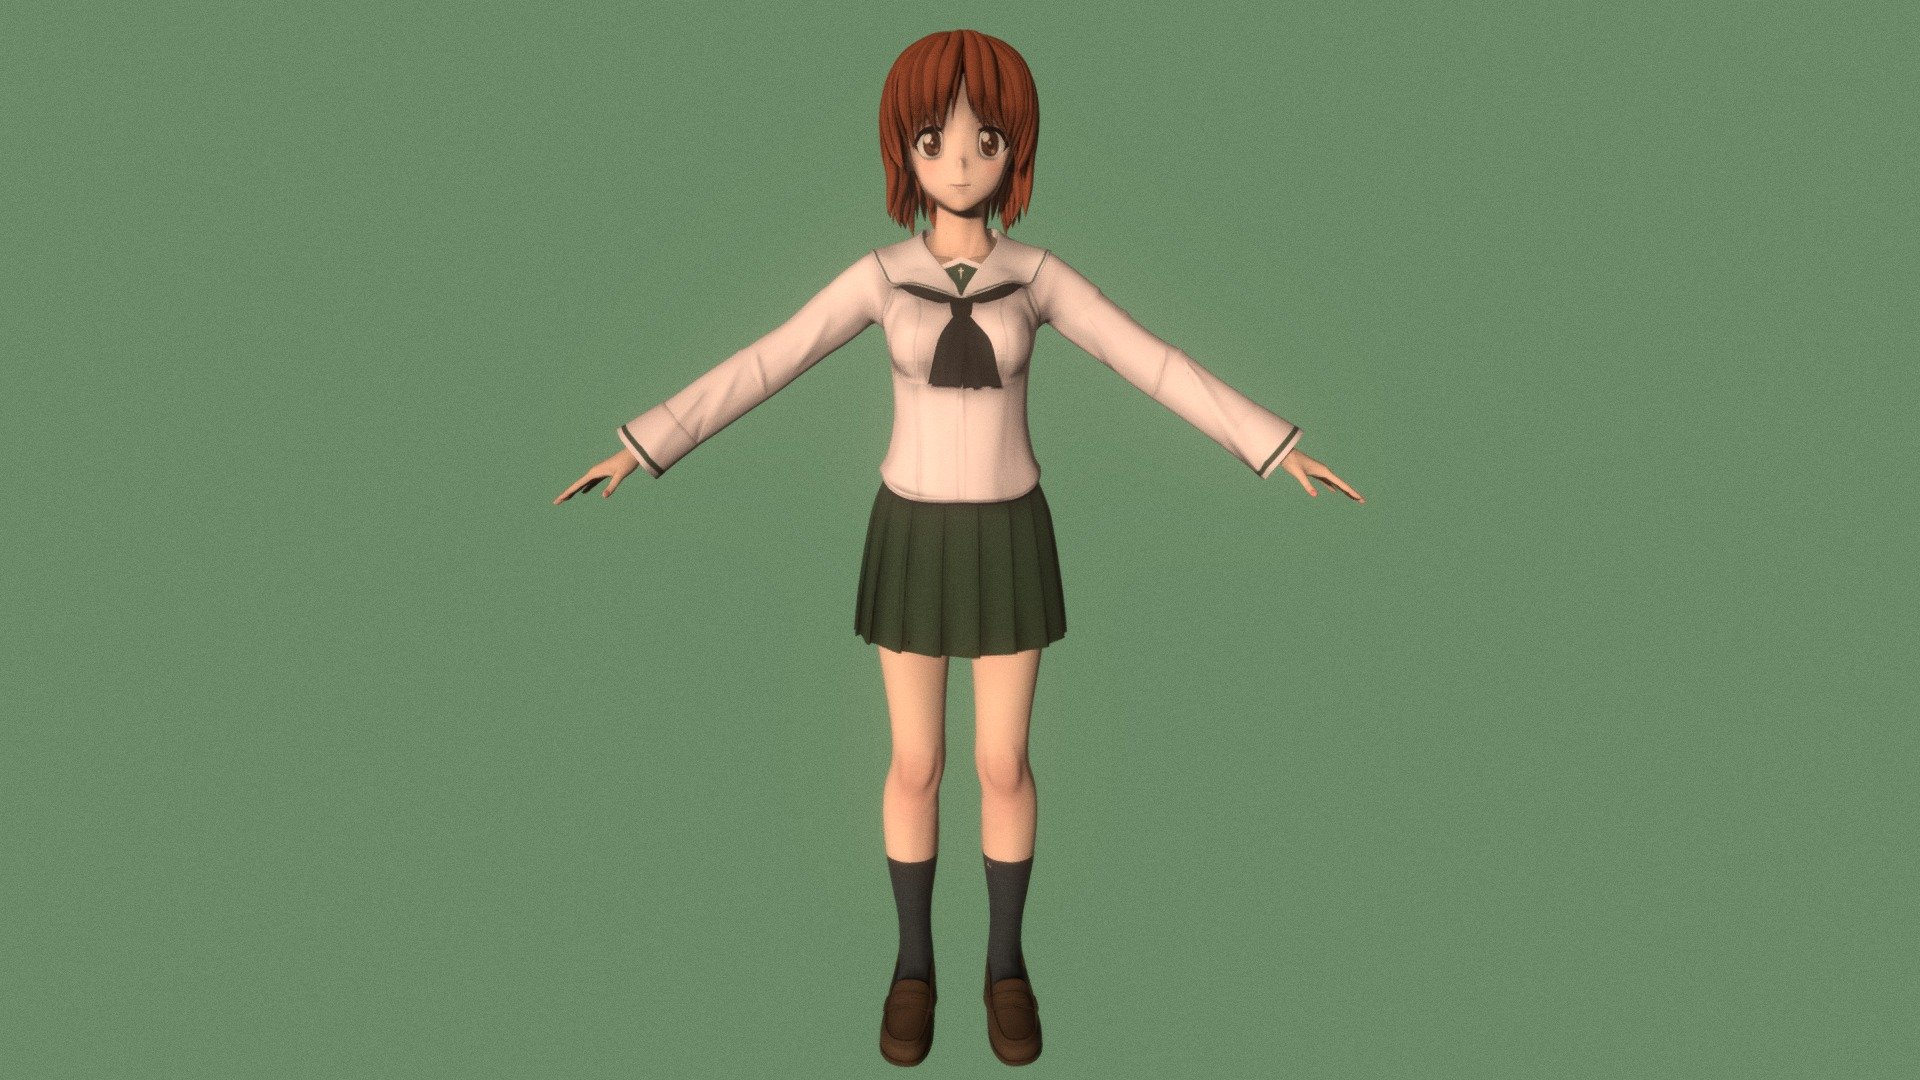 T-pose rigged model of anime girl Miho Nishizumi (Girls und Panzer).

Body and clothings are rigged and skinned by 3ds Max CAT system.

Eye direction and facial animation controlled by Morpher modifier / Shape Keys / Blendshape.

This product include .FBX (ver. 7200) and .MAX (ver. 2010) files.

3ds Max version is turbosmoothed to give a high quality render (as you can see here).

Original main body mesh have ~7.000 polys.

This 3D model may need some tweaking to adapt the rig system to games engine and other platforms.

I support convert model to various file formats (the rig data will be lost in this process): 3DS; AI; ASE; DAE; DWF; DWG; DXF; FLT; HTR; IGS; M3G; MQO; OBJ; SAT; STL; W3D; WRL; X.

You can buy all of my models in one pack to save cost: https://sketchfab.com/3d-models/all-of-my-anime-girls-c5a56156994e4193b9e8fa21a3b8360b

And I can make commission models.

If you have any questions, please leave a comment or contact me via my email 3d.eden.project@gmail.com 3d model